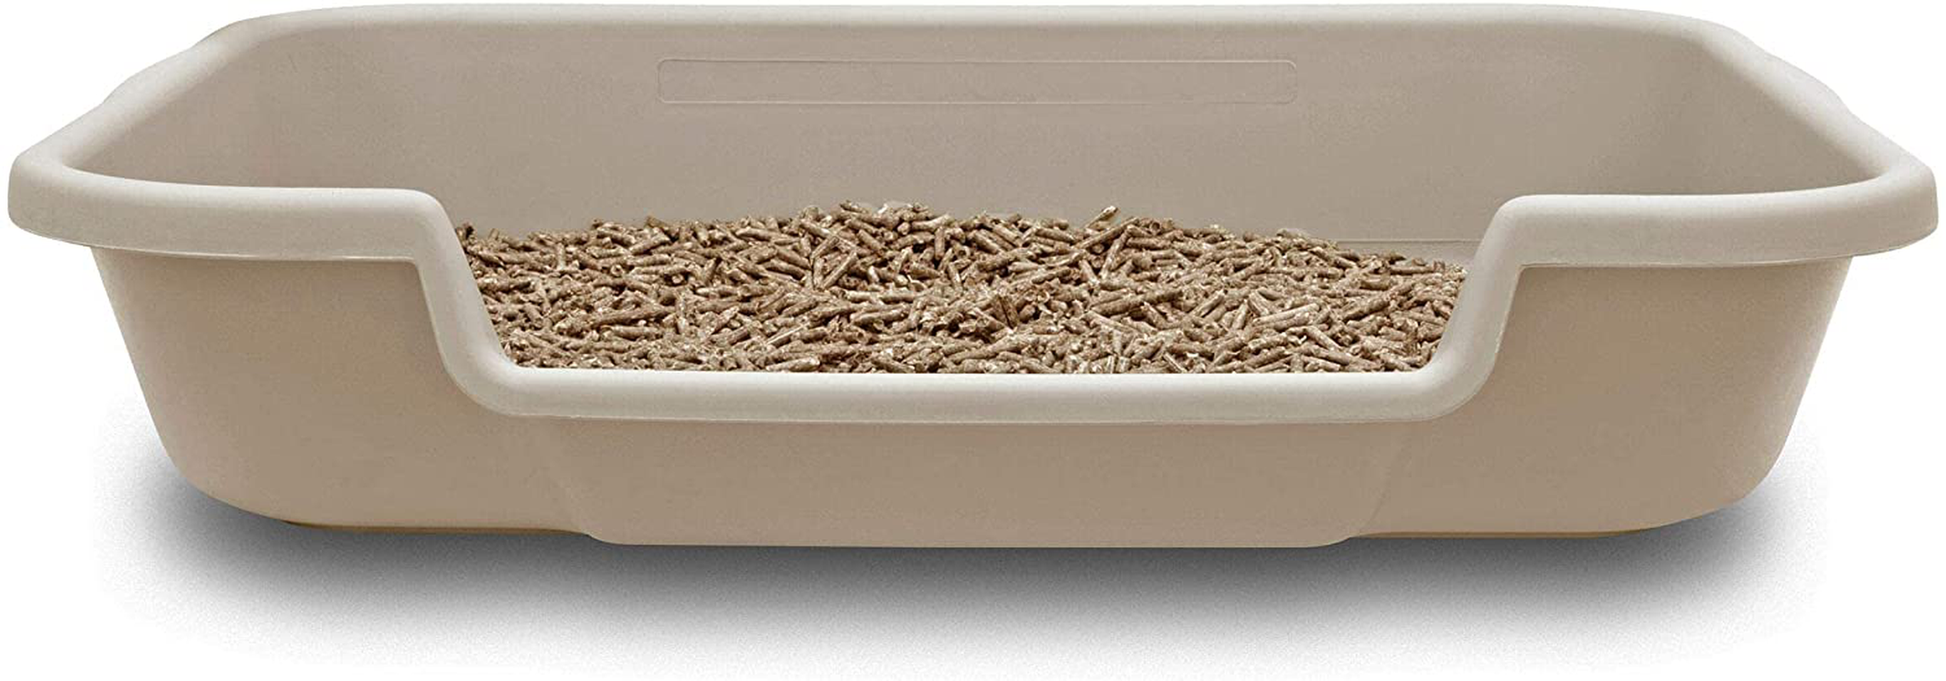 Ne14Pets Kitty Go Here Senior Cat Litter Box, Beach Sand Color, 2 Pans in One Box, save on Shipping, Large 24" X 20" X 5". USA Made Animals & Pet Supplies > Pet Supplies > Cat Supplies > Cat Litter Peck Rock Associates   